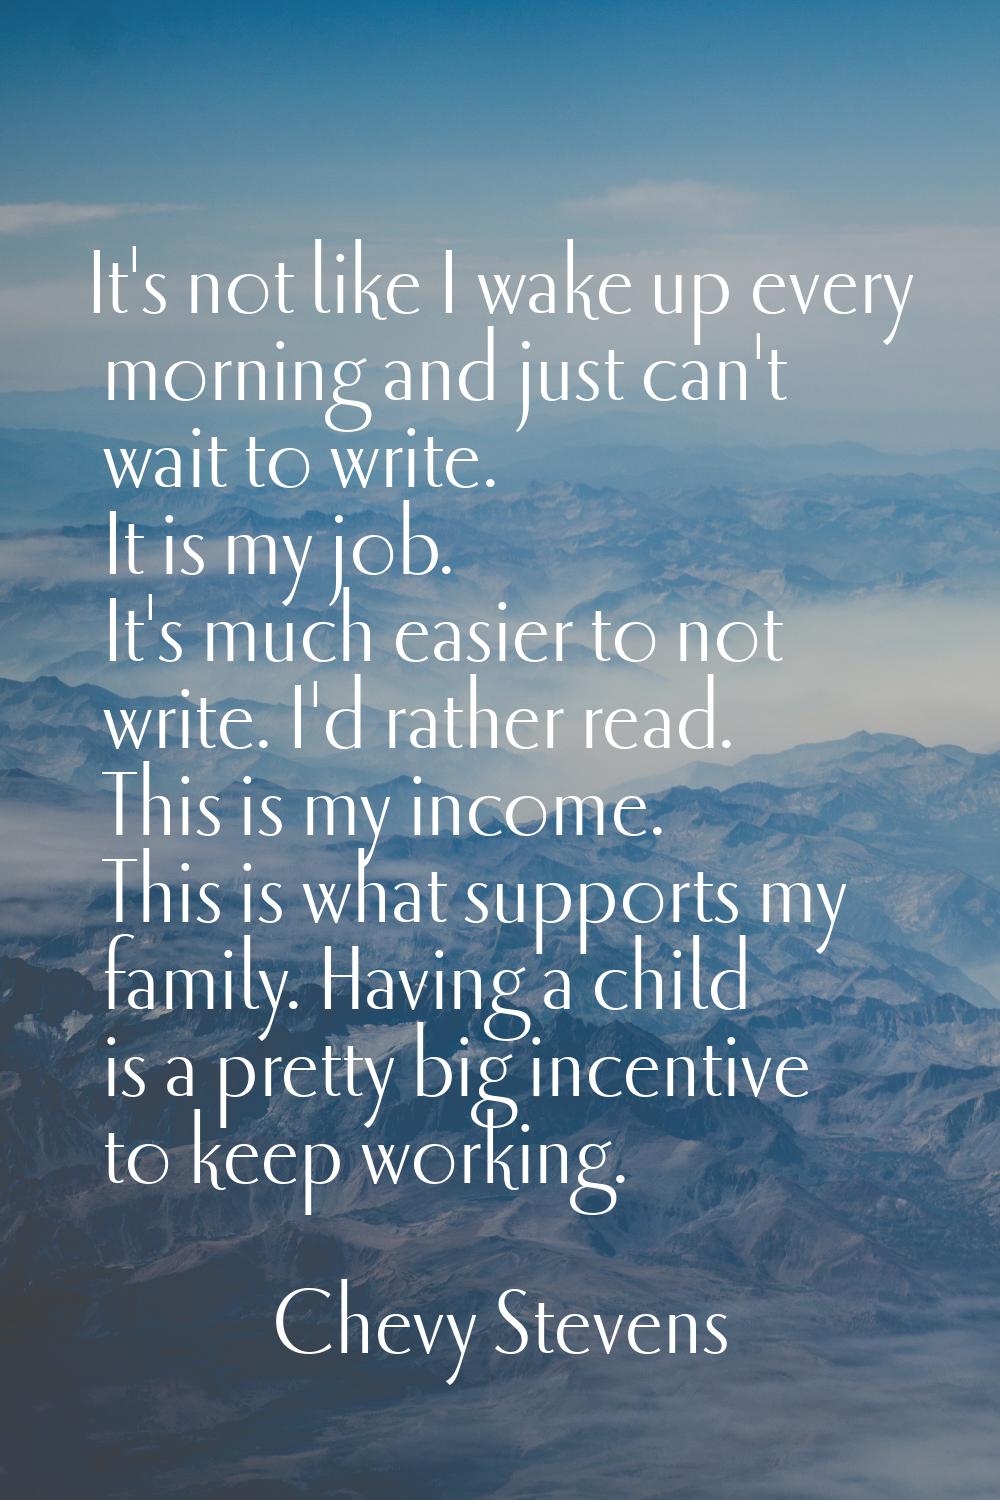 It's not like I wake up every morning and just can't wait to write. It is my job. It's much easier 